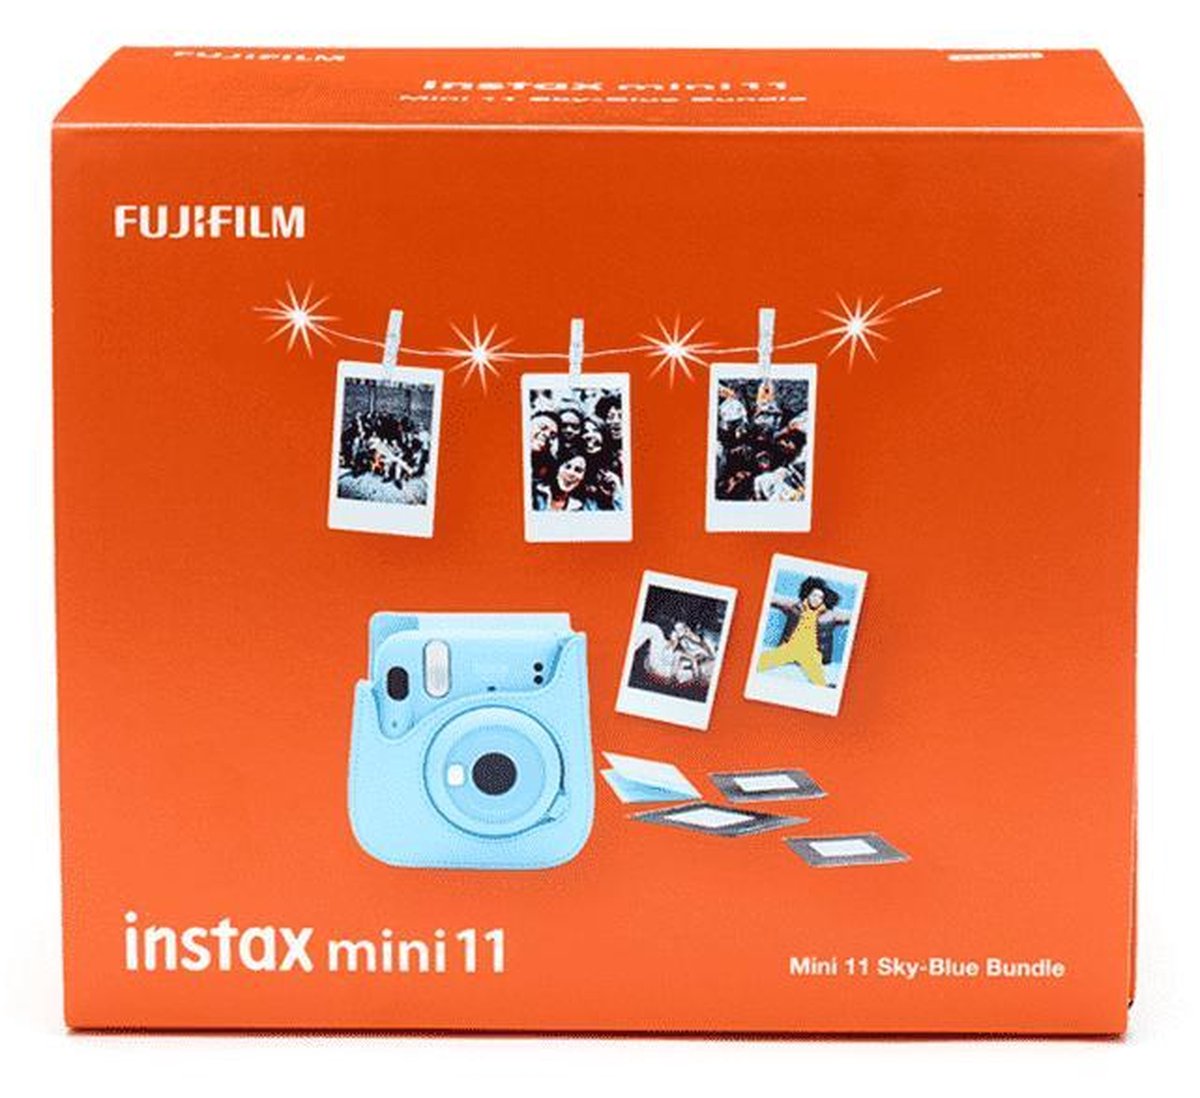 Selfie Mirror etc Including Mini 11 Camera Case Four-Color Filter Cherry Blossom Powder 15 Items Bsuuy Instant Camera Accessories Bundle Compatible with FujiFilm Instax Mini 11 Camera 